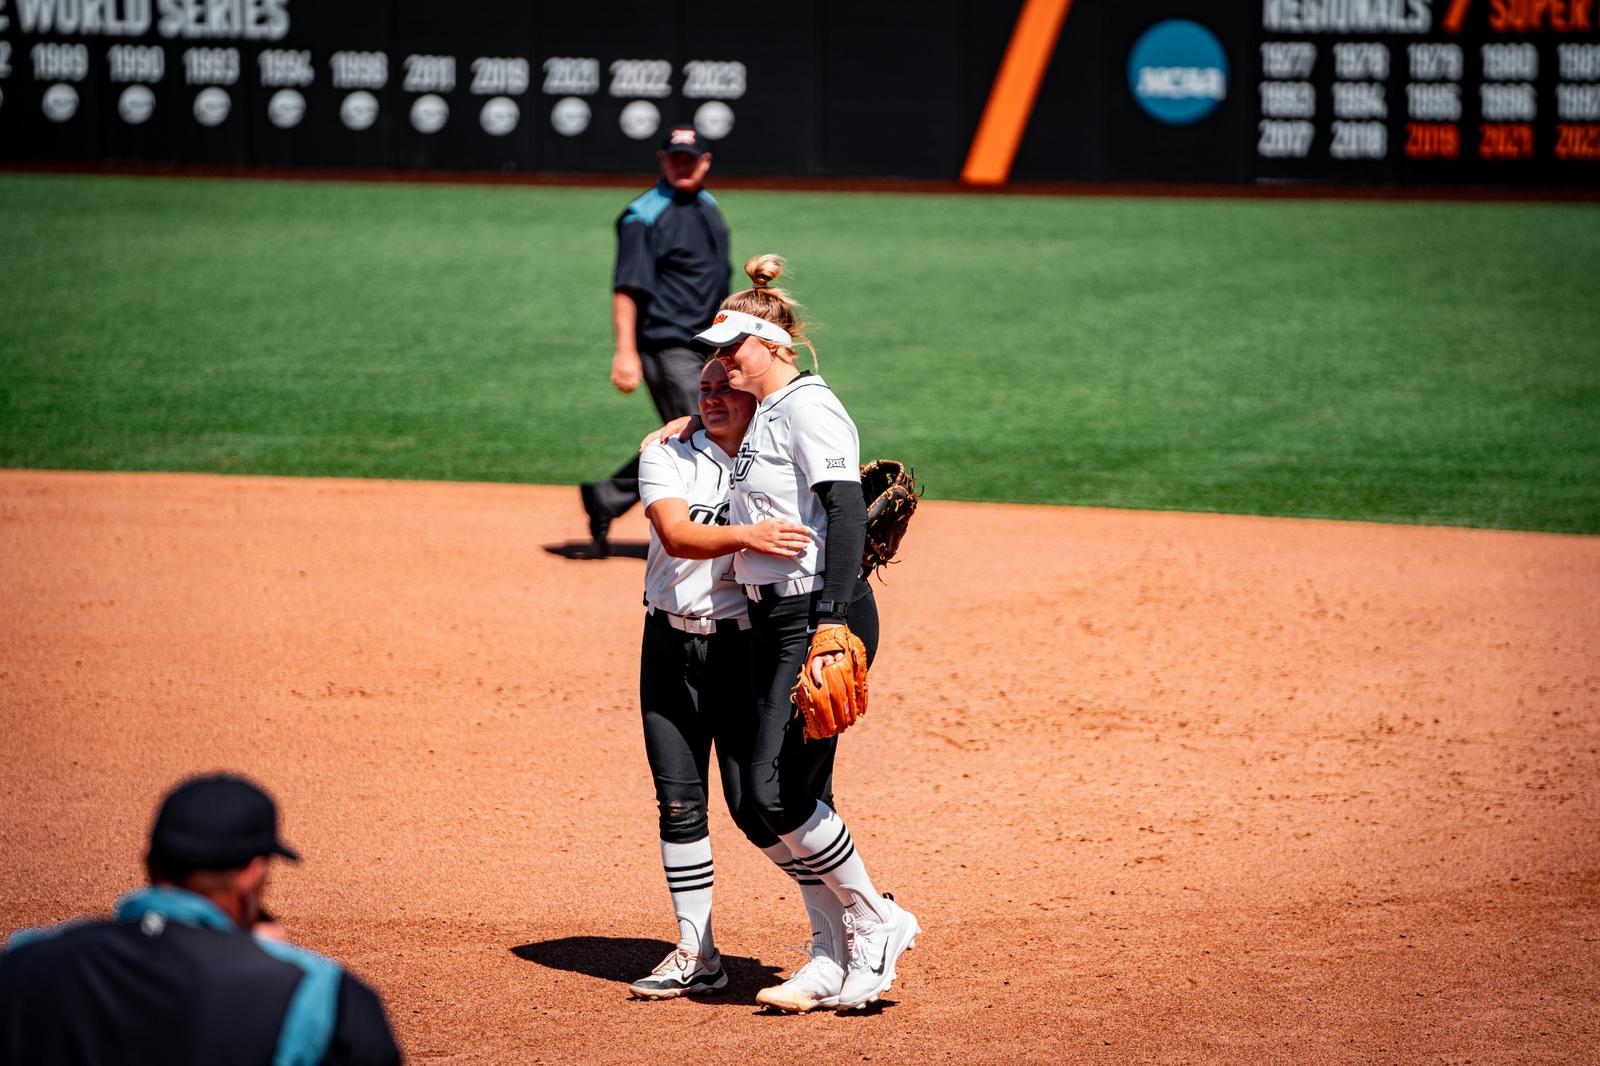 Cowgirl Softball Rises to Consensus Top-Five Team